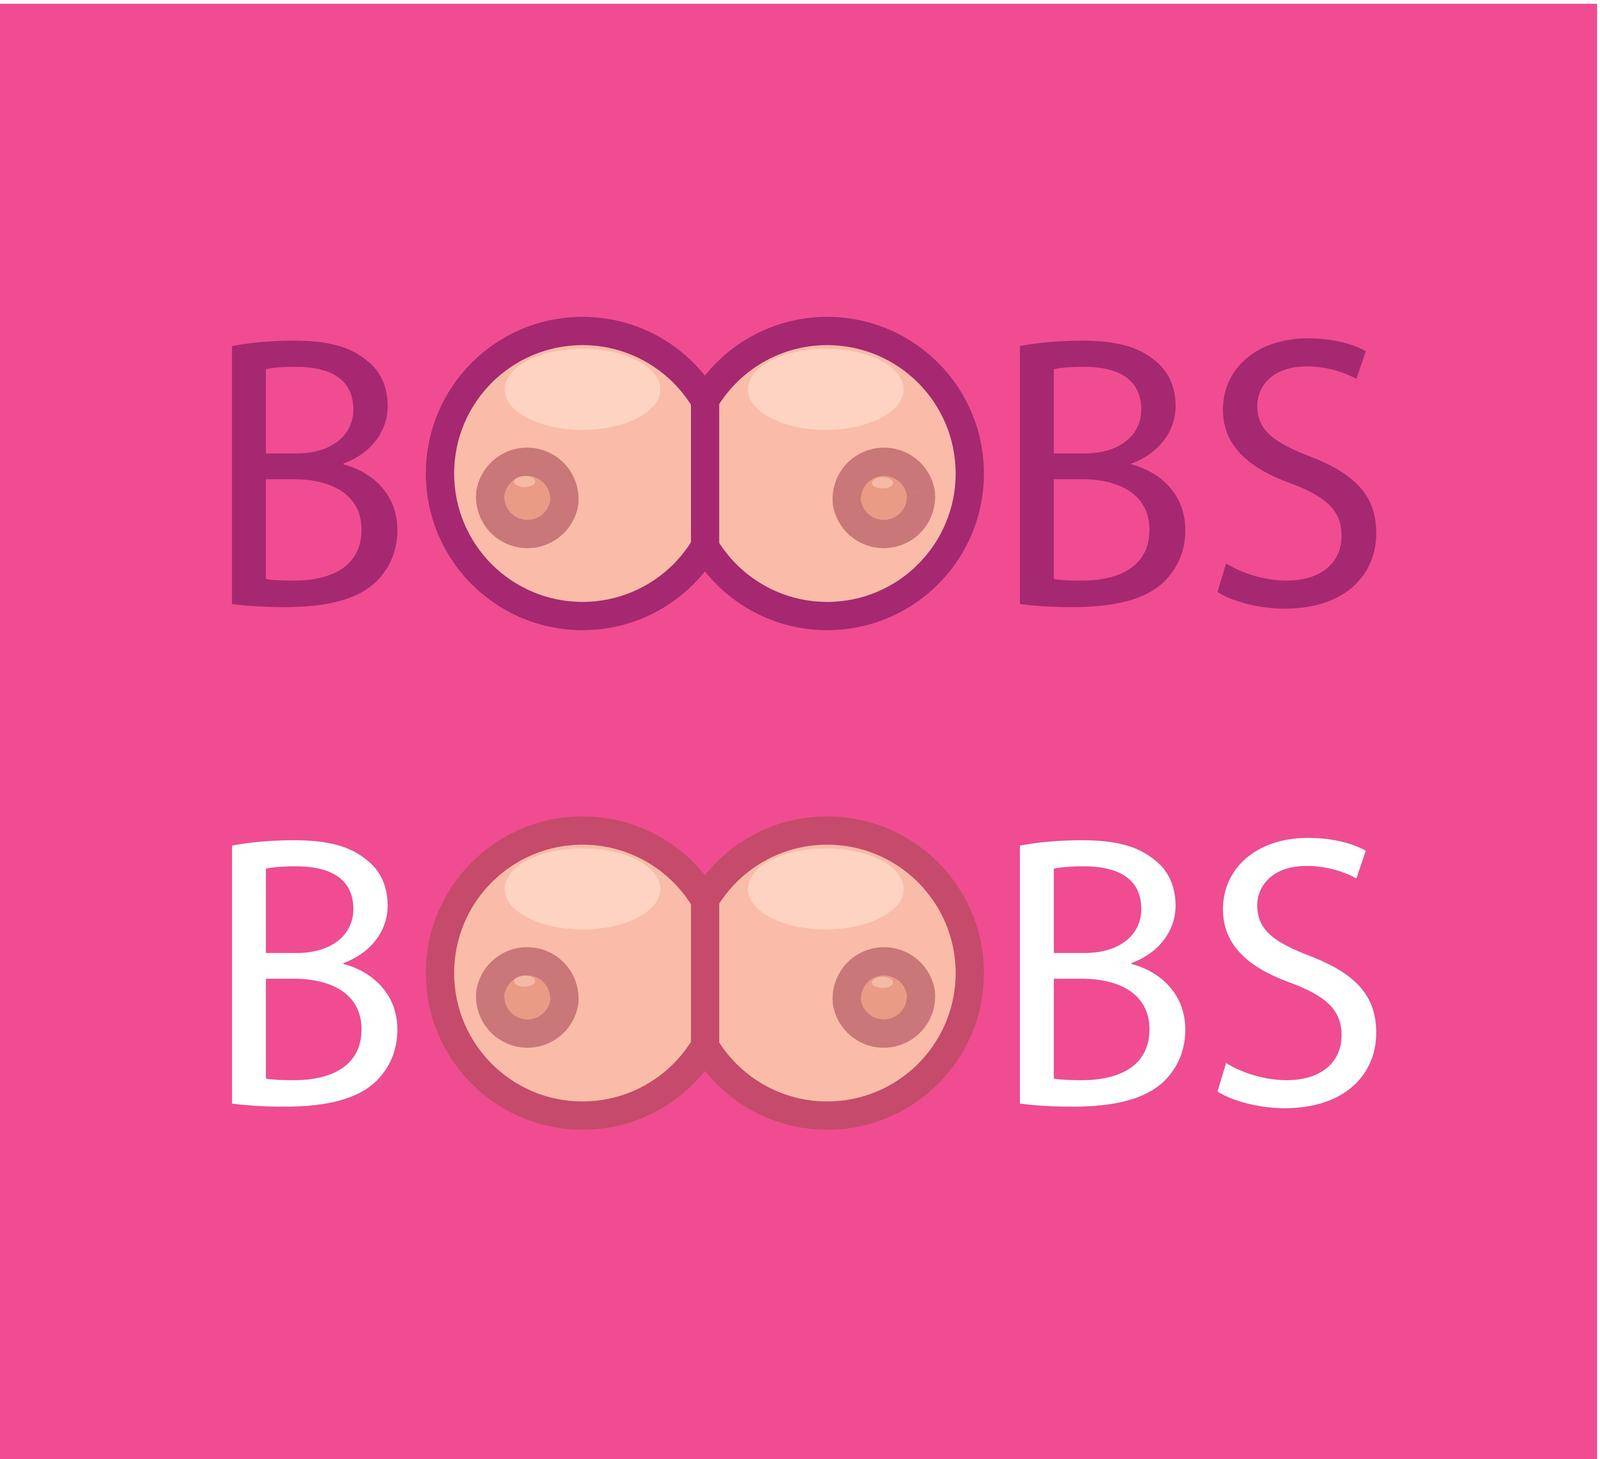 Creative Erotic XXX sign with boobs in word by macroarting